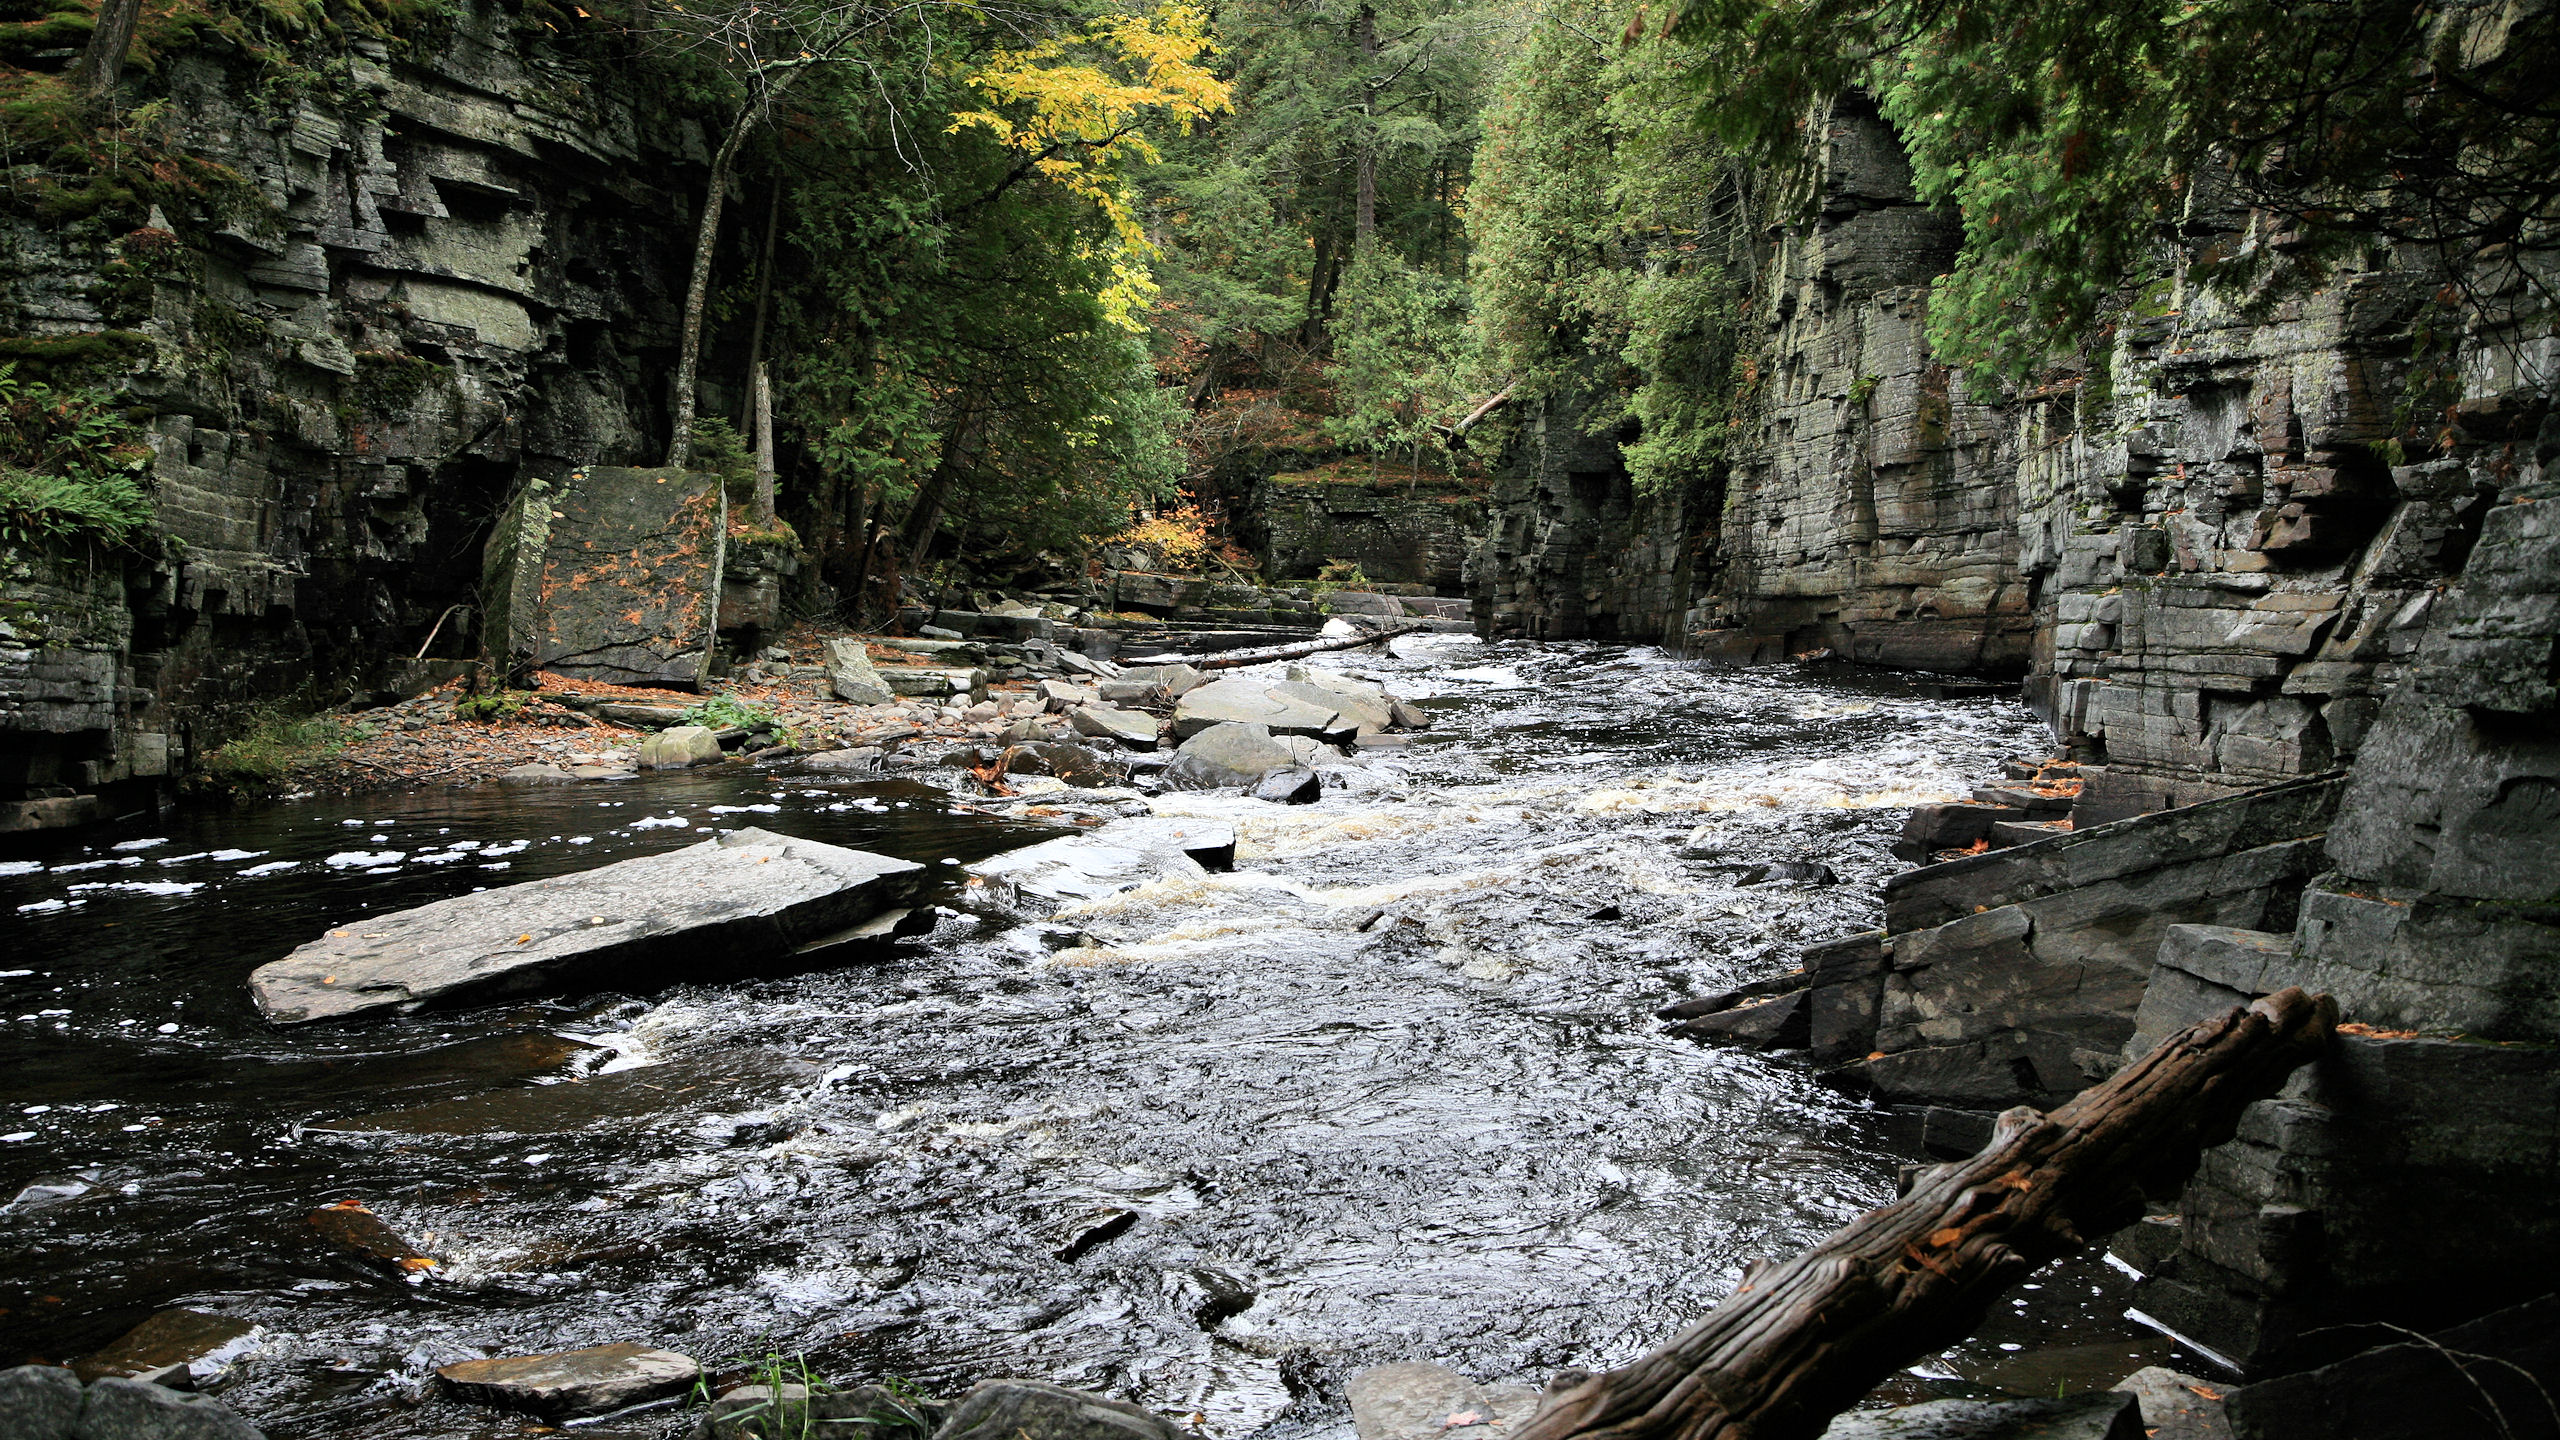 The Most Scenic Hiking Trails in Michigan